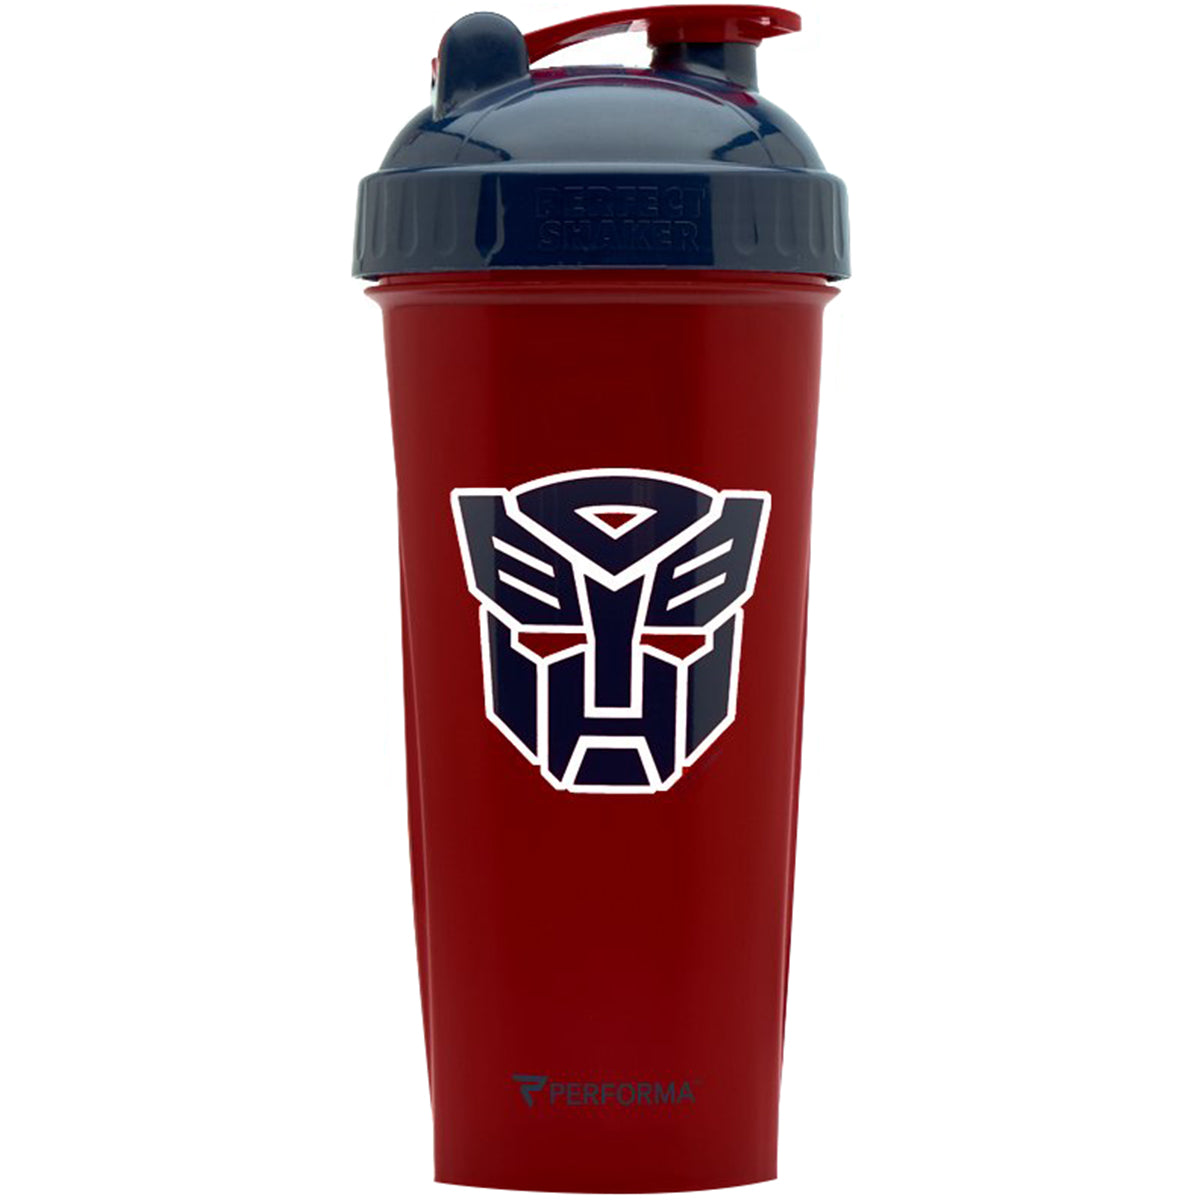 PerfectShaker Performa 28 oz. Transformers Shaker Cup Bottle - Autobot - Red PerfectShaker